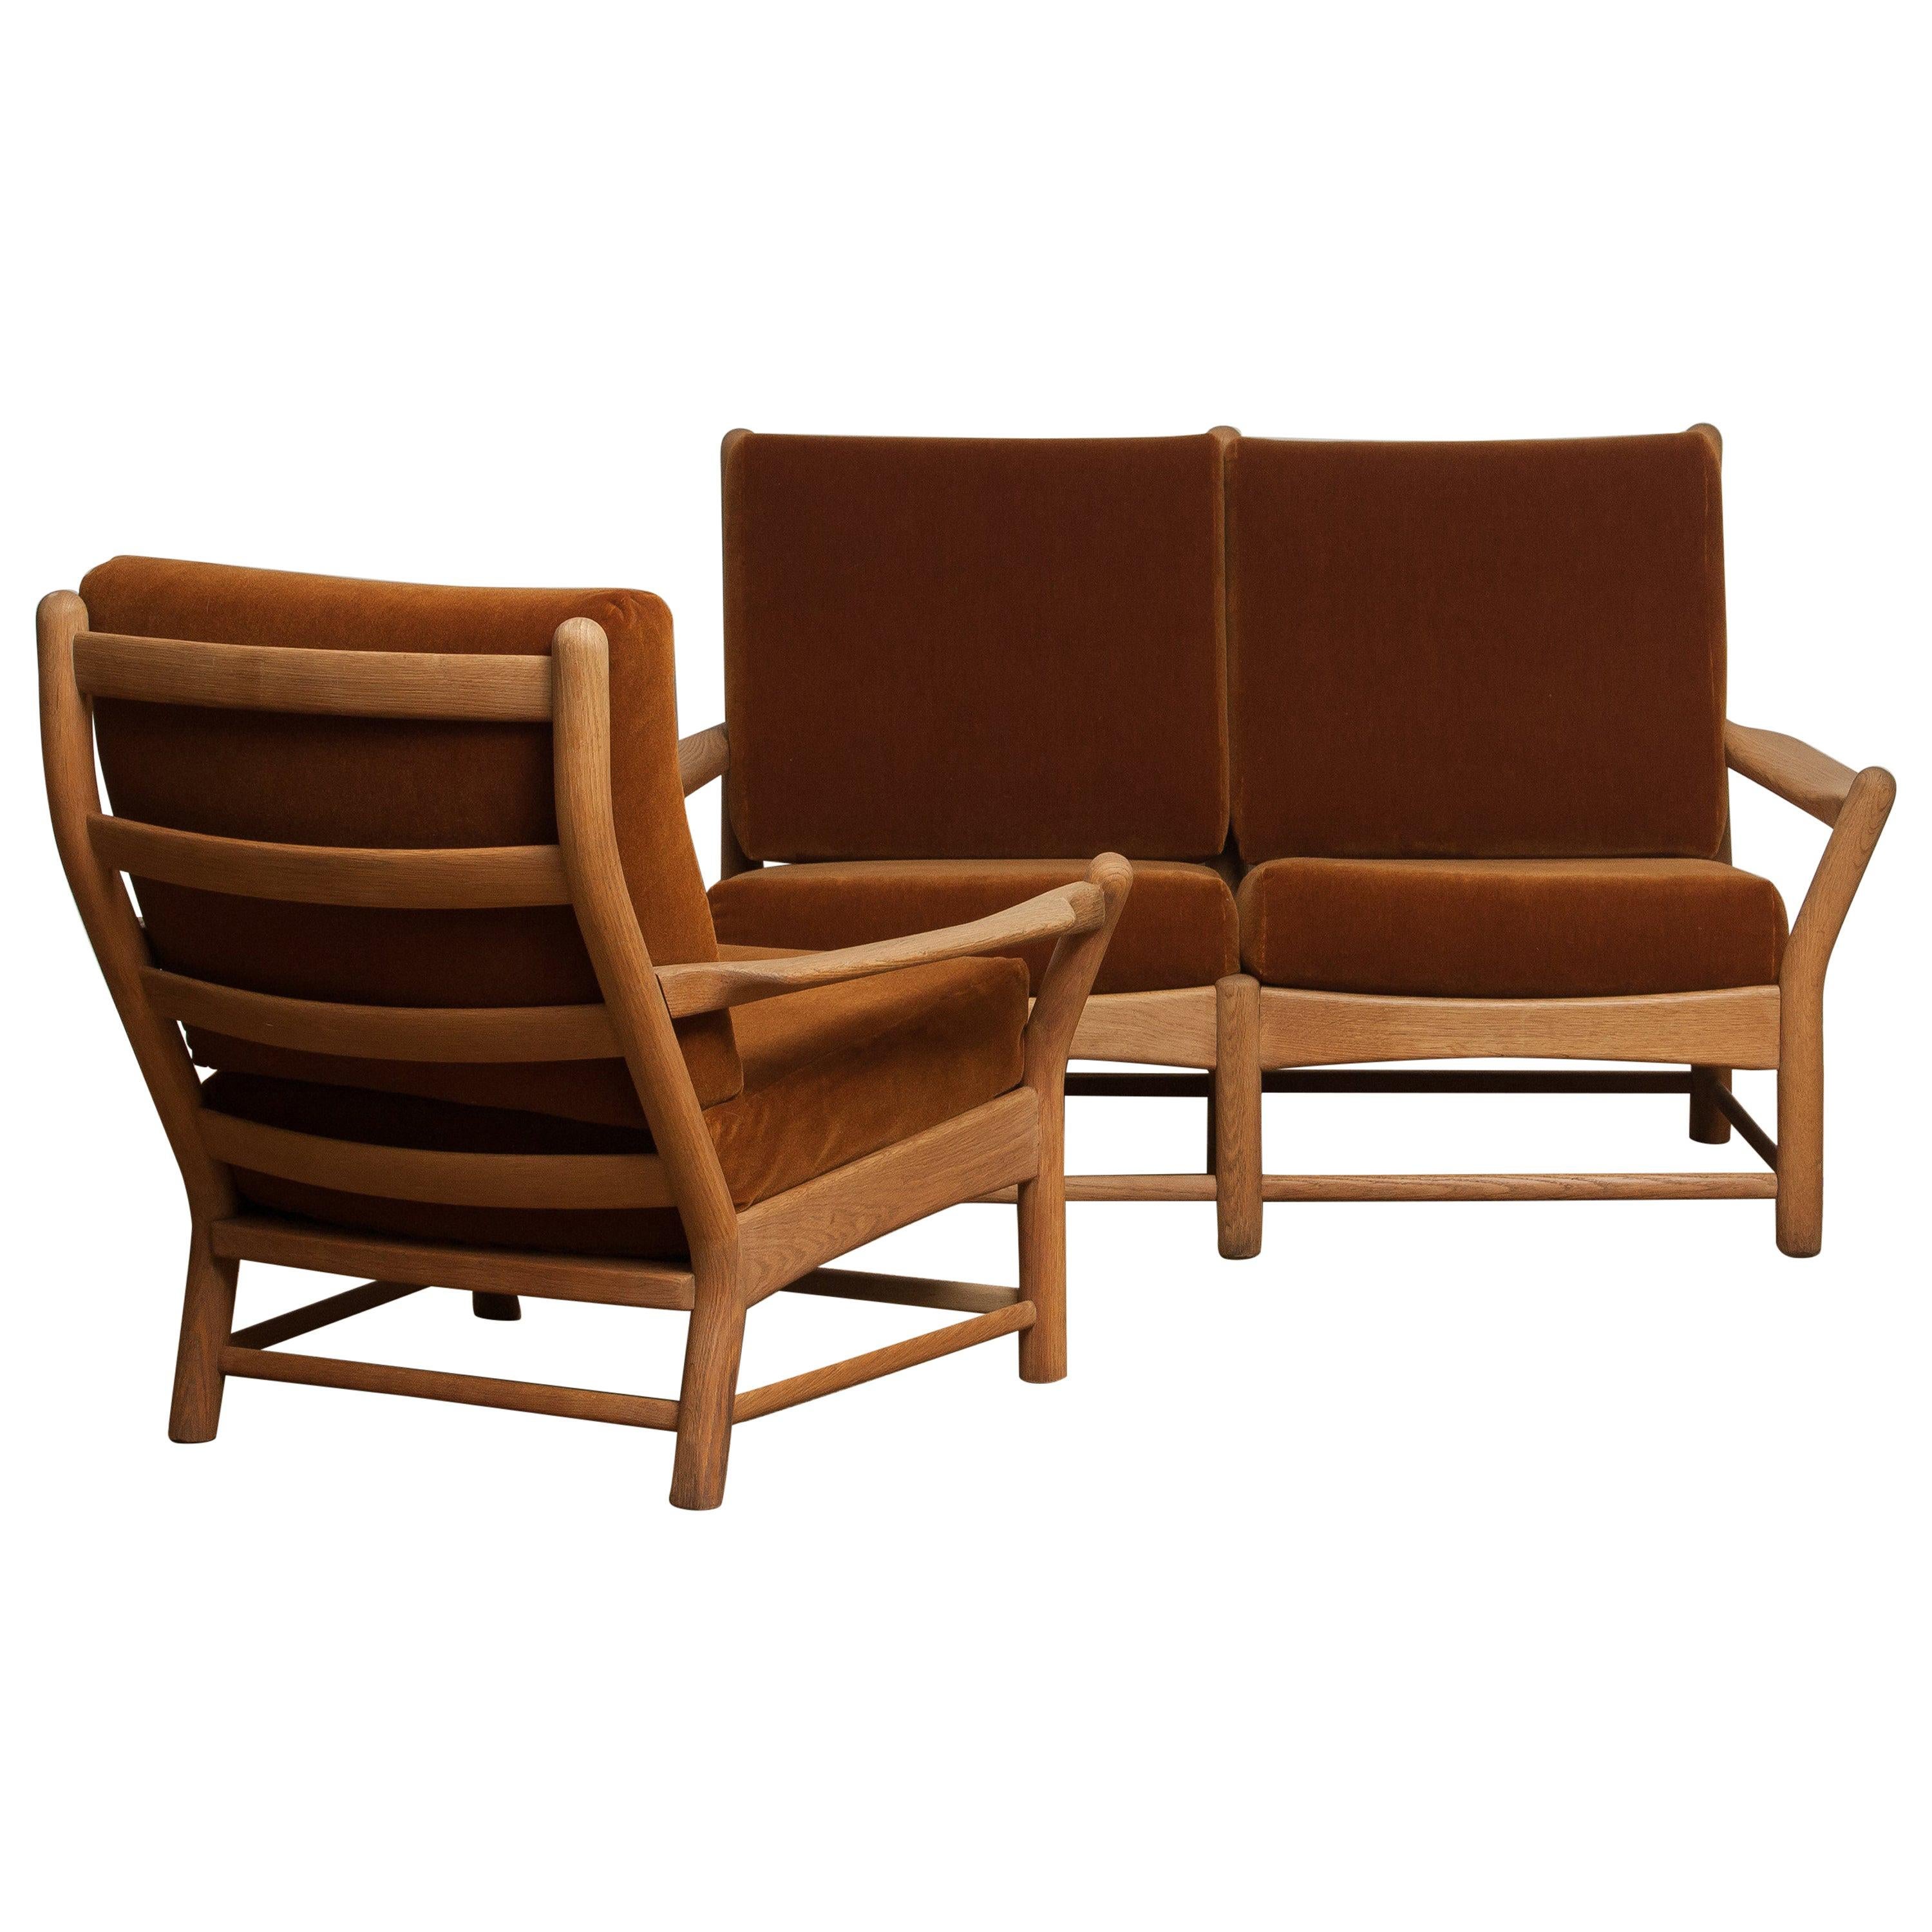 1950s, Oak and Brown Velvet Sofa and Chair Lounge Set from Denmark